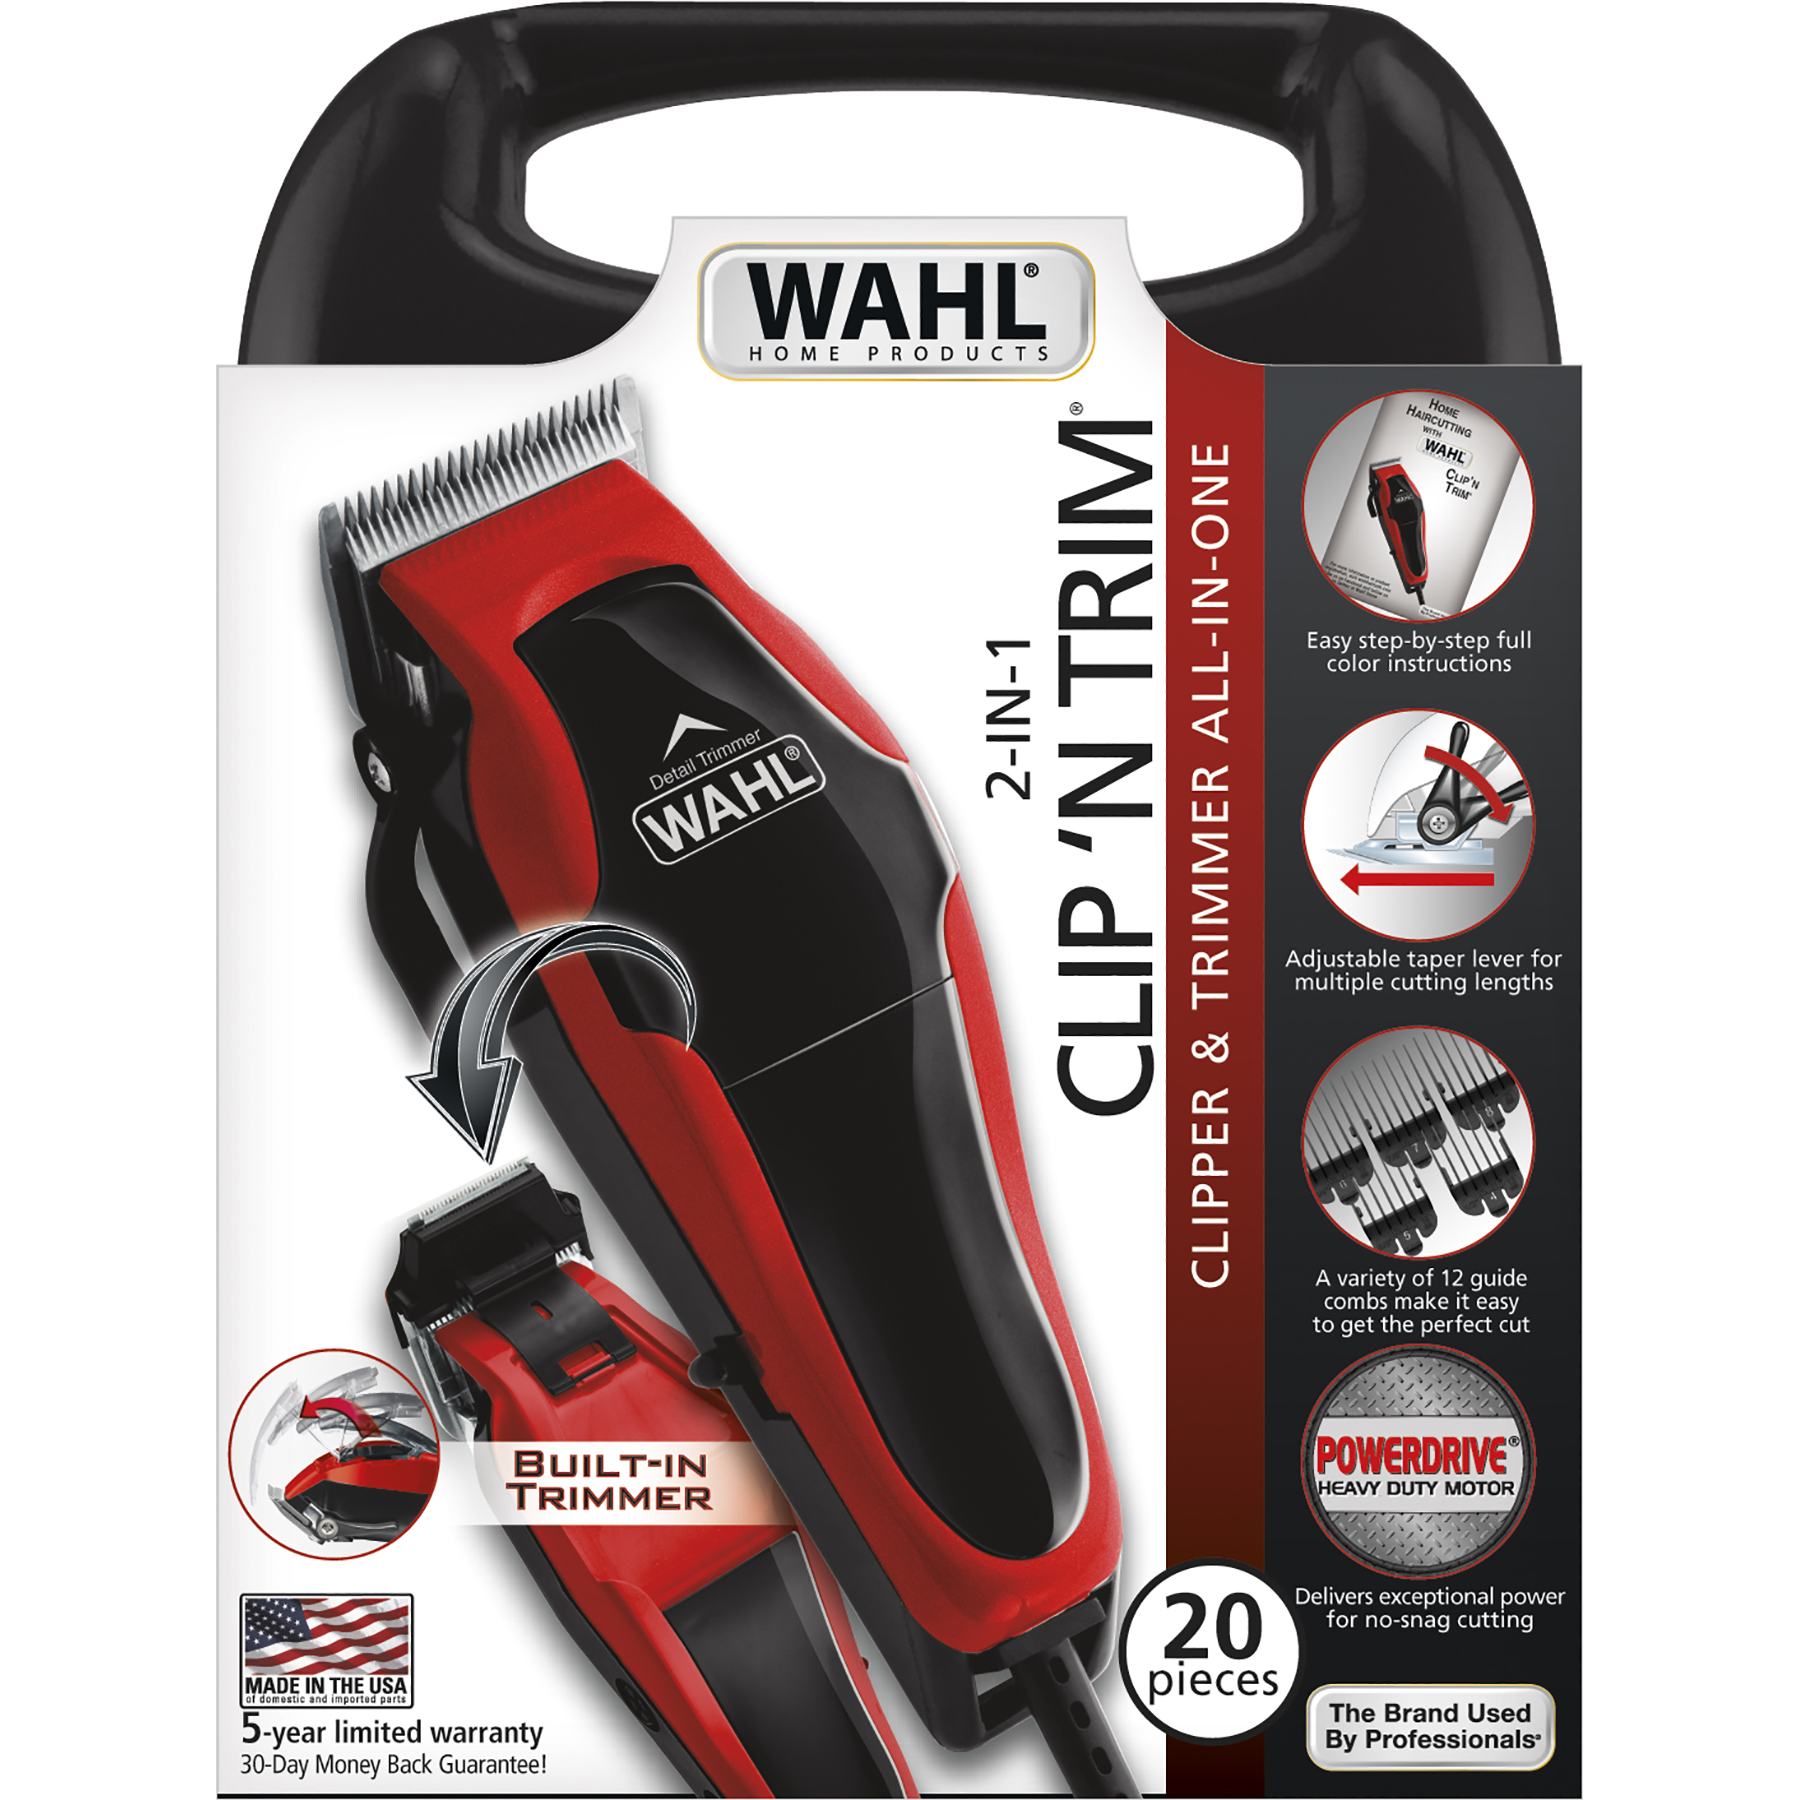 wahl 12 pieces mini pro cord clipper and trimmer 9307